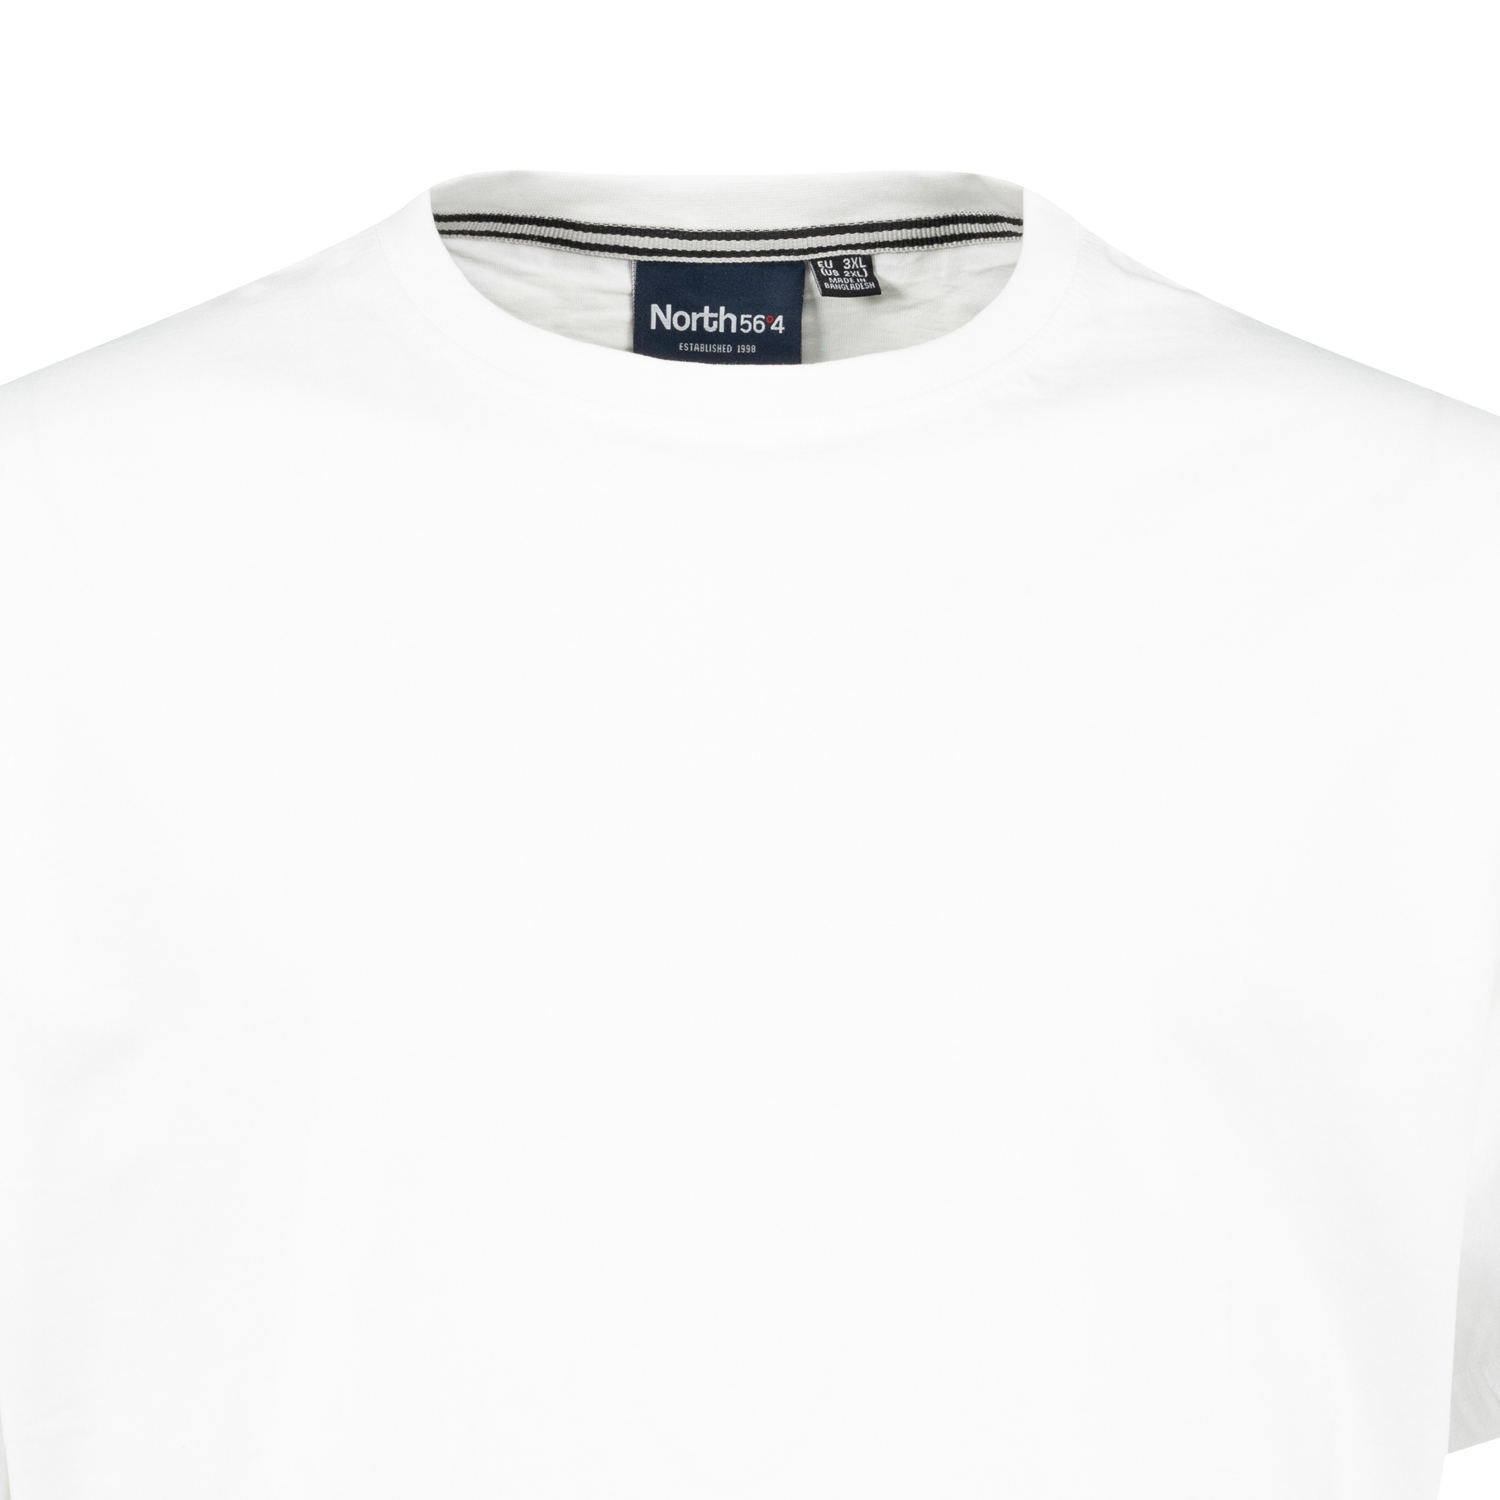 Basic t-shirt in white by North 56°4 in extra large sizes until 8XL